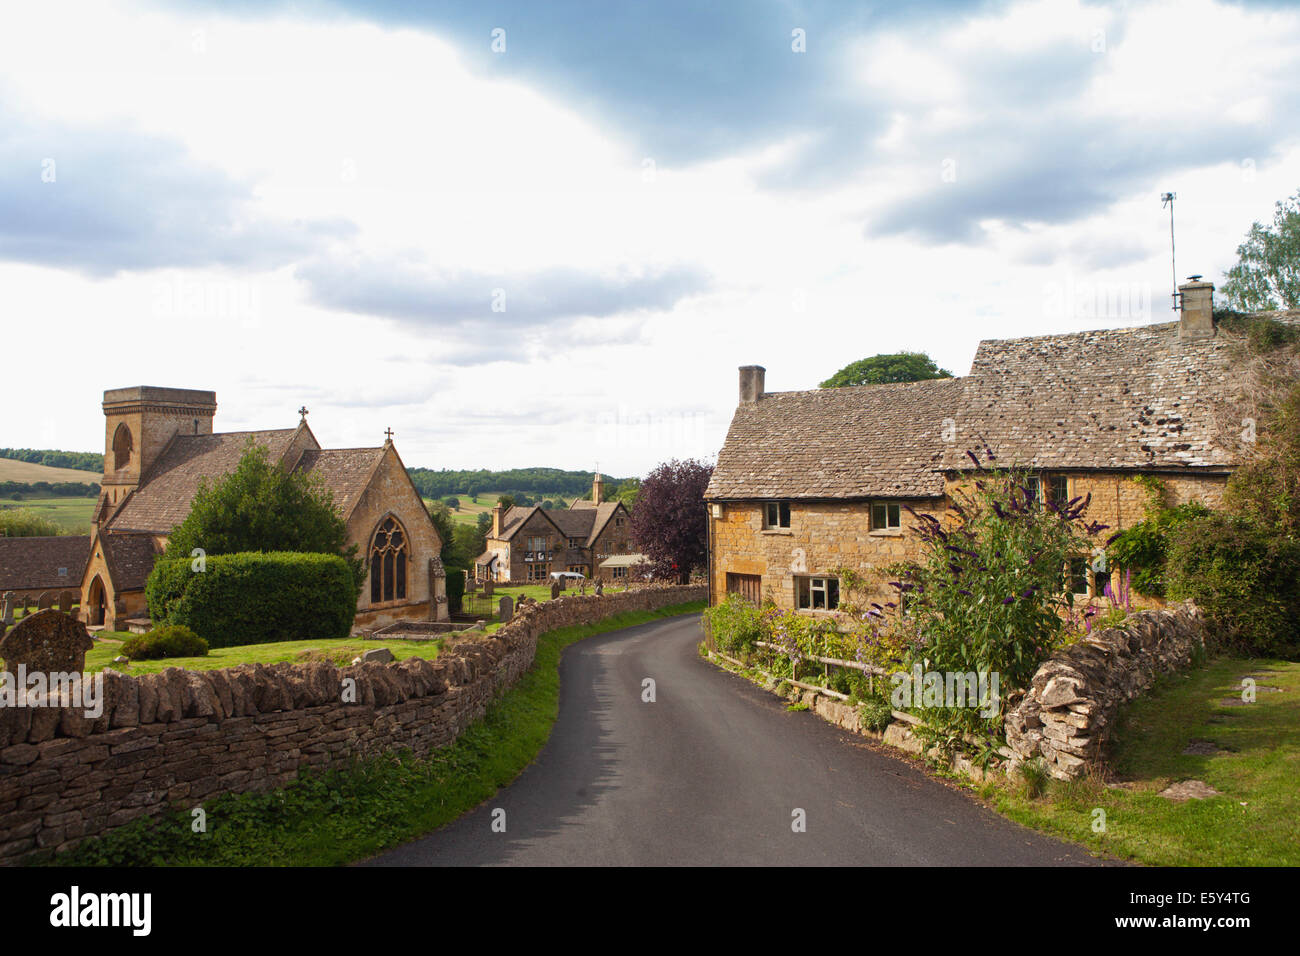 SNOWSHILL VILLAGE CHURCH AND HOUSES Stock Photo